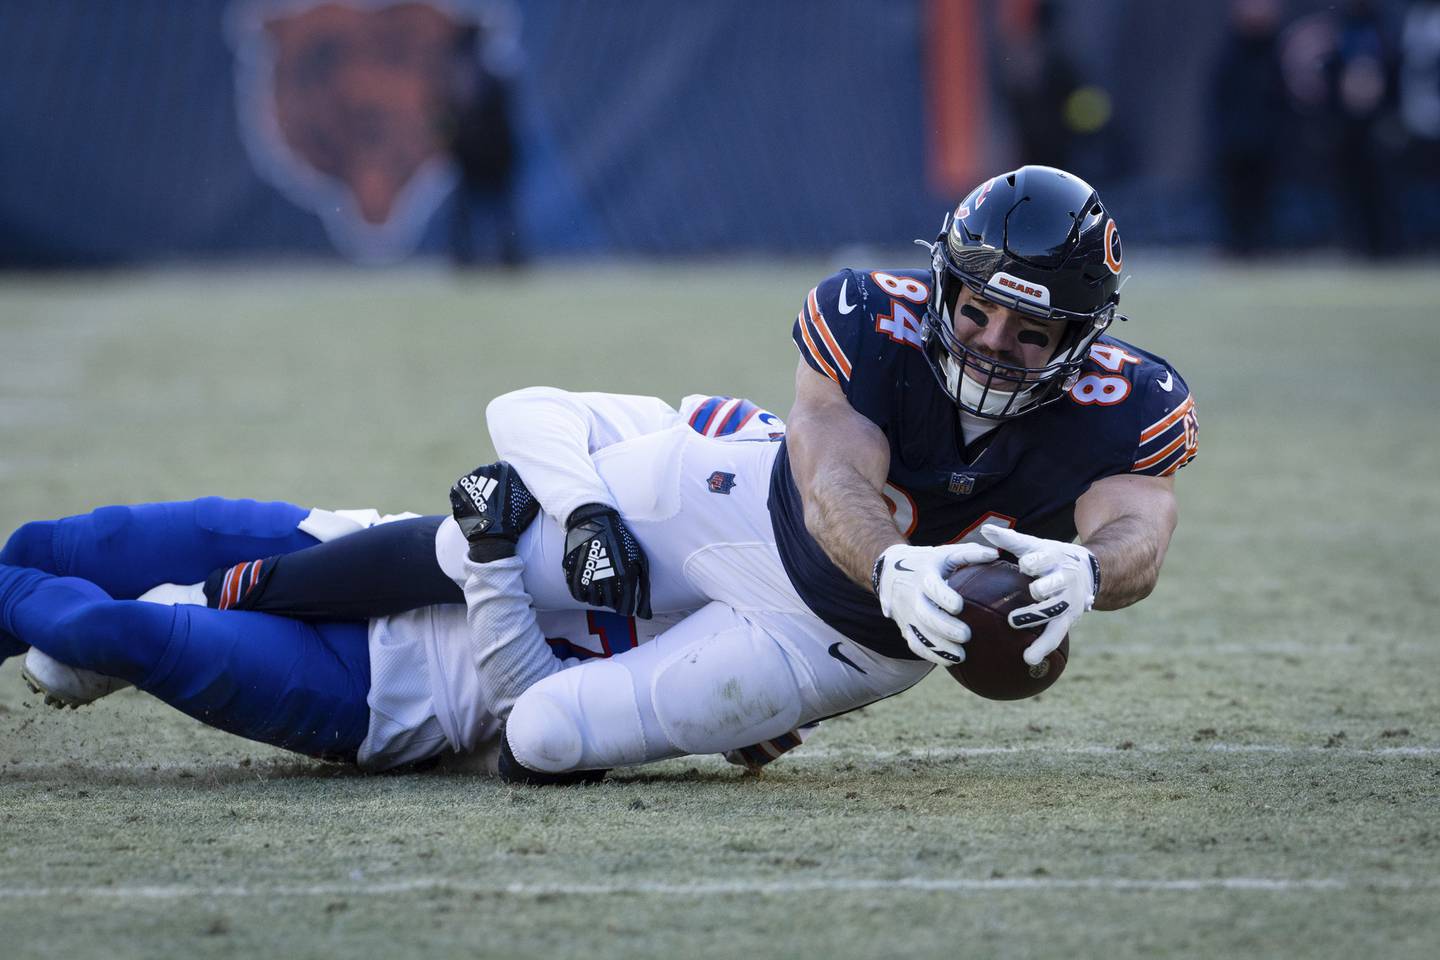 Bears tight end Ryan Griffin (84) reaches out trying to convert a fourth down, but the play was overturned at Soldier Field on Dec. 24, 2022.